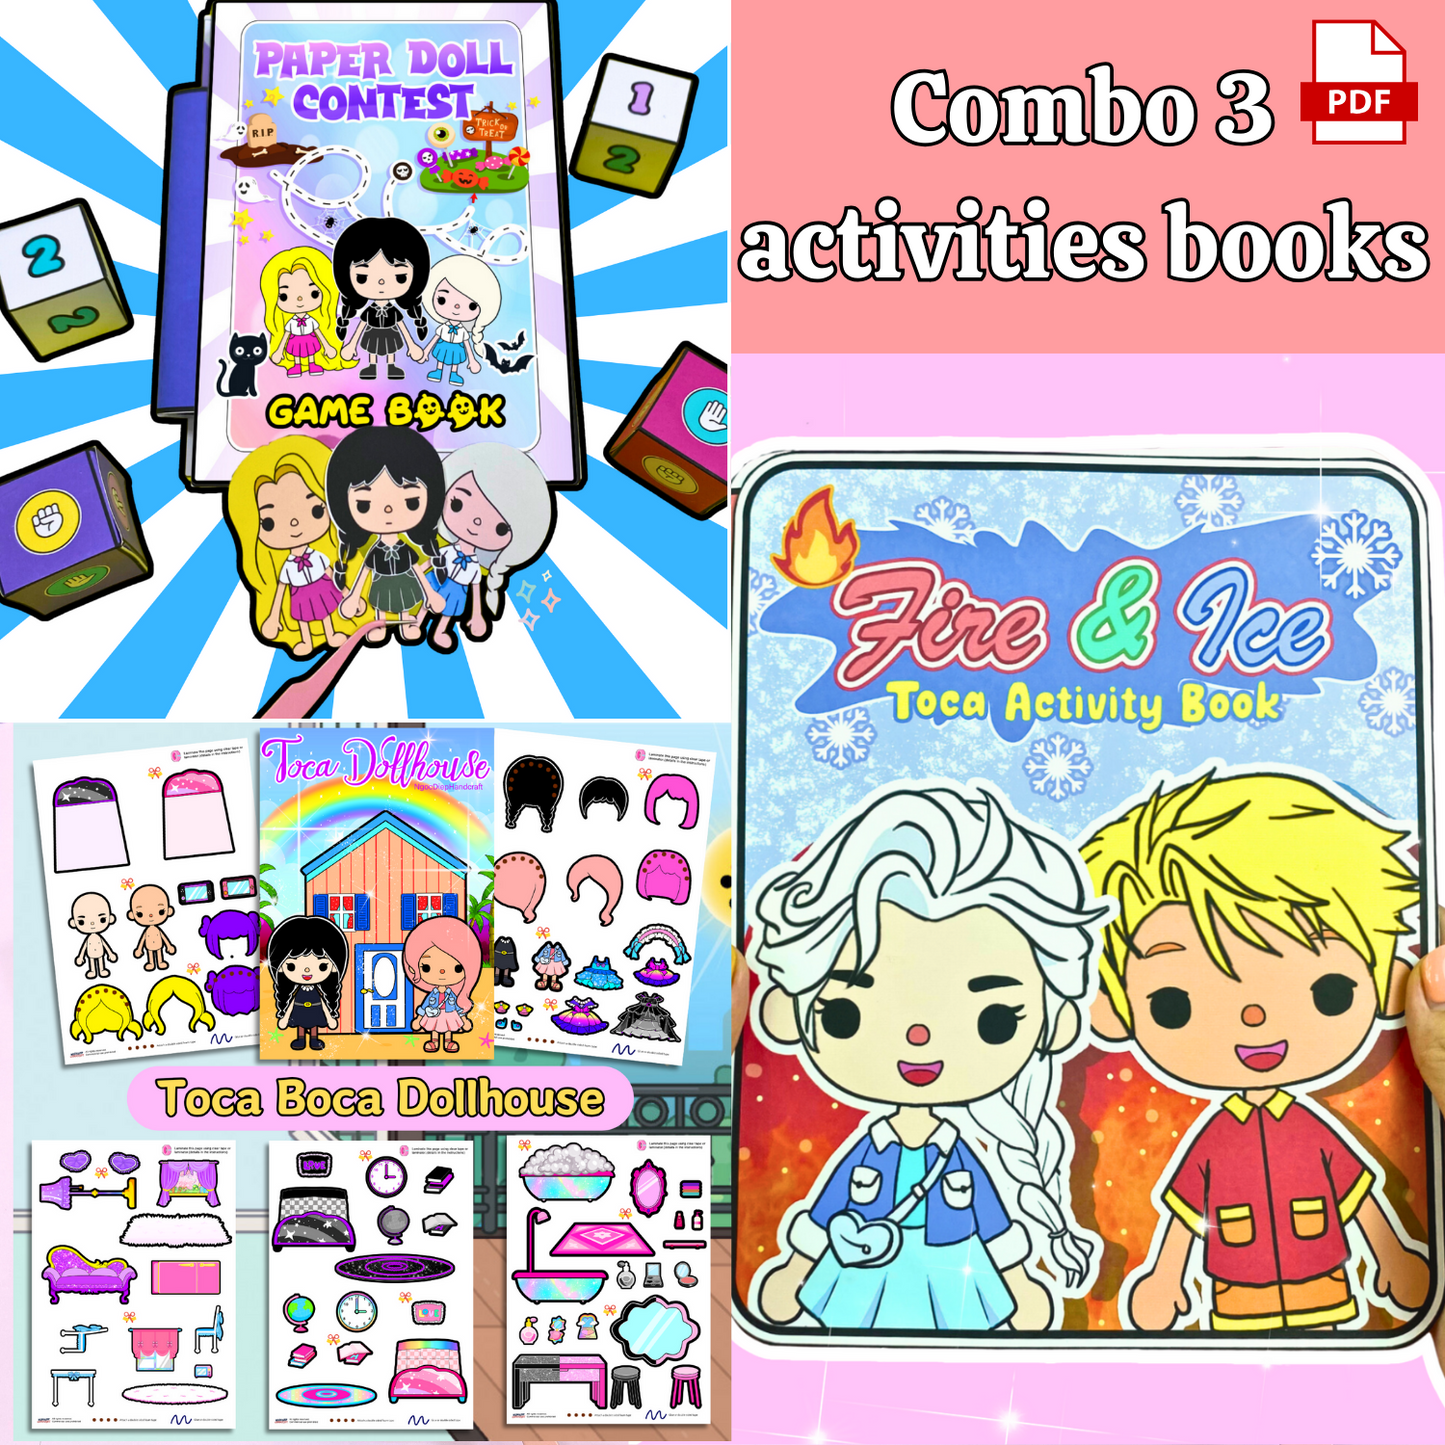 Education Activity Book | Toca Boca Gaming Book, Paper Doll Book, Safe Paper Toy for kid, Unique Birthday Gifts, Family connection, Limit screen time, Boost creativity